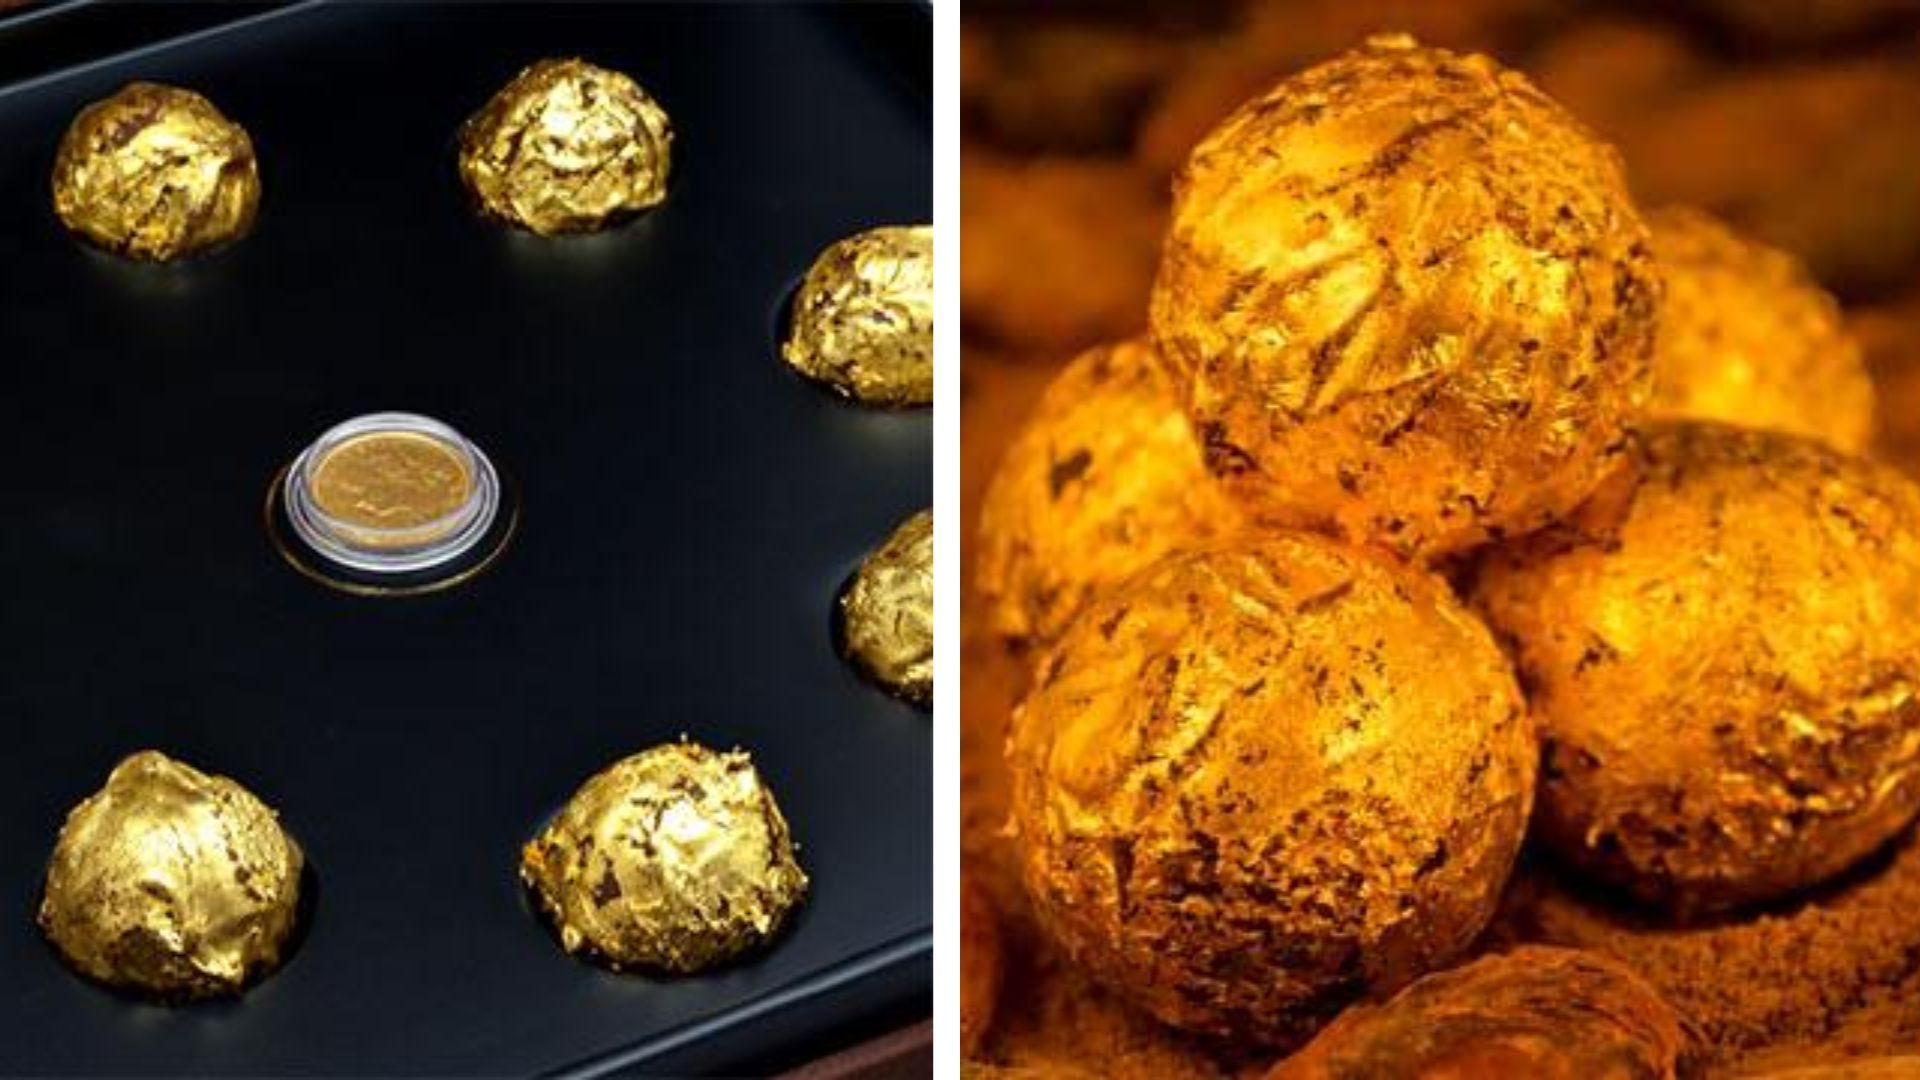 The Most Expensive Chocolate Brands In the World